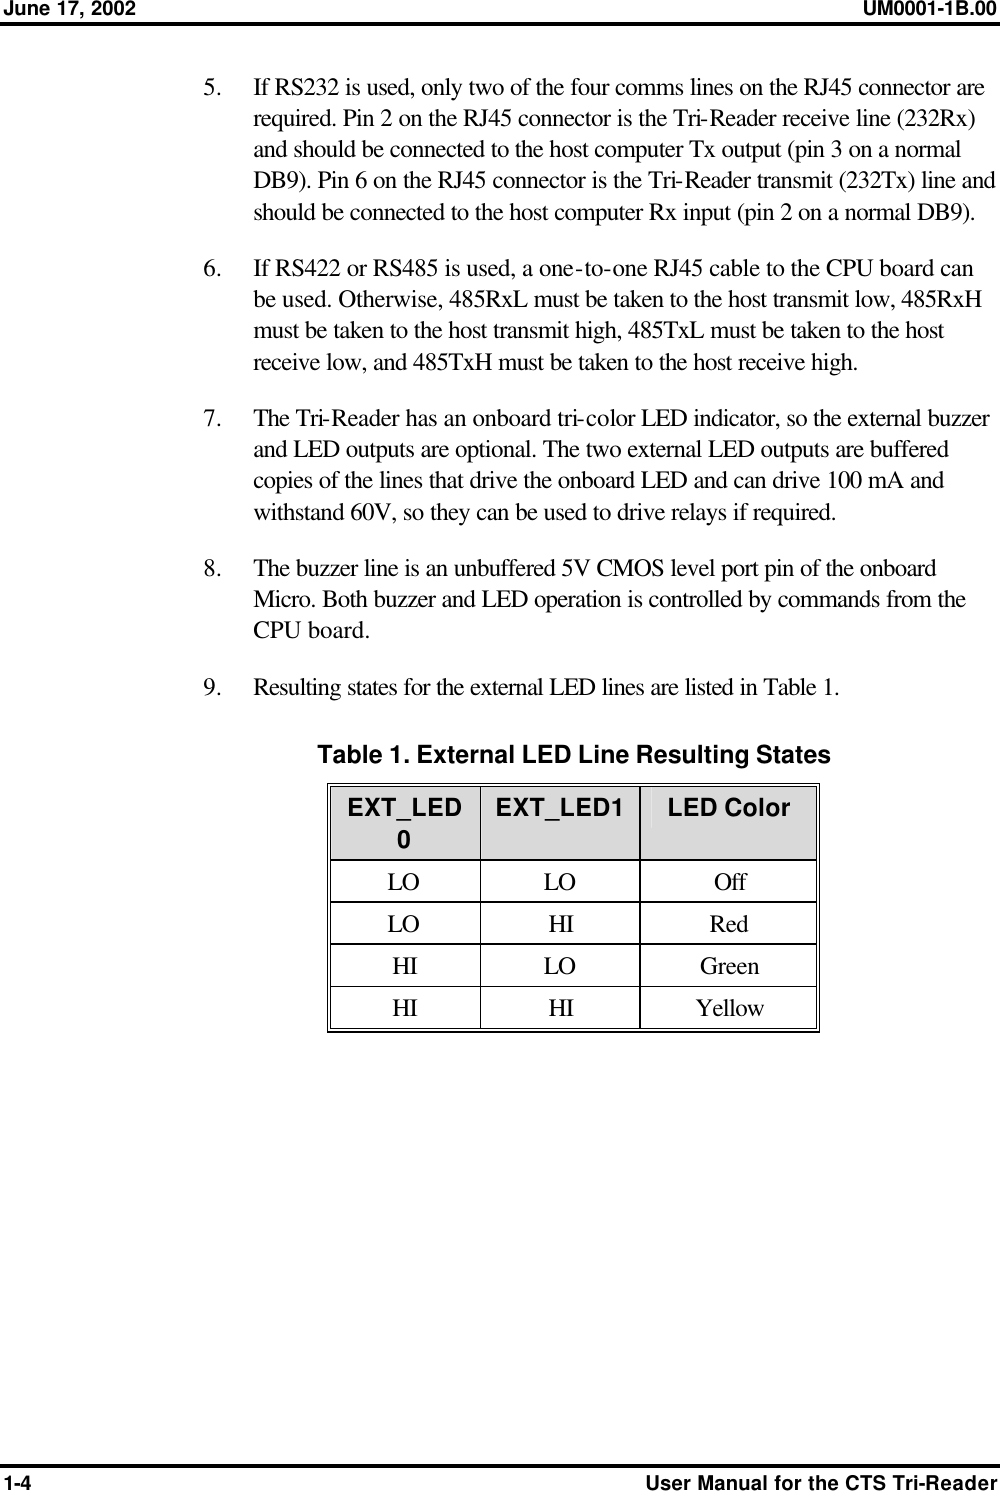 June 17, 2002 UM0001-1B.00  1-4 User Manual for the CTS Tri-Reader 5.  If RS232 is used, only two of the four comms lines on the RJ45 connector are required. Pin 2 on the RJ45 connector is the Tri-Reader receive line (232Rx) and should be connected to the host computer Tx output (pin 3 on a normal DB9). Pin 6 on the RJ45 connector is the Tri-Reader transmit (232Tx) line and should be connected to the host computer Rx input (pin 2 on a normal DB9). 6.  If RS422 or RS485 is used, a one-to-one RJ45 cable to the CPU board can be used. Otherwise, 485RxL must be taken to the host transmit low, 485RxH must be taken to the host transmit high, 485TxL must be taken to the host receive low, and 485TxH must be taken to the host receive high. 7.  The Tri-Reader has an onboard tri-color LED indicator, so the external buzzer and LED outputs are optional. The two external LED outputs are buffered copies of the lines that drive the onboard LED and can drive 100 mA and withstand 60V, so they can be used to drive relays if required. 8.  The buzzer line is an unbuffered 5V CMOS level port pin of the onboard Micro. Both buzzer and LED operation is controlled by commands from the CPU board. 9.  Resulting states for the external LED lines are listed in Table 1. Table 1. External LED Line Resulting States EXT_LED0 EXT_LED1 LED Color LO LO Off LO HI Red HI LO Green HI HI Yellow  